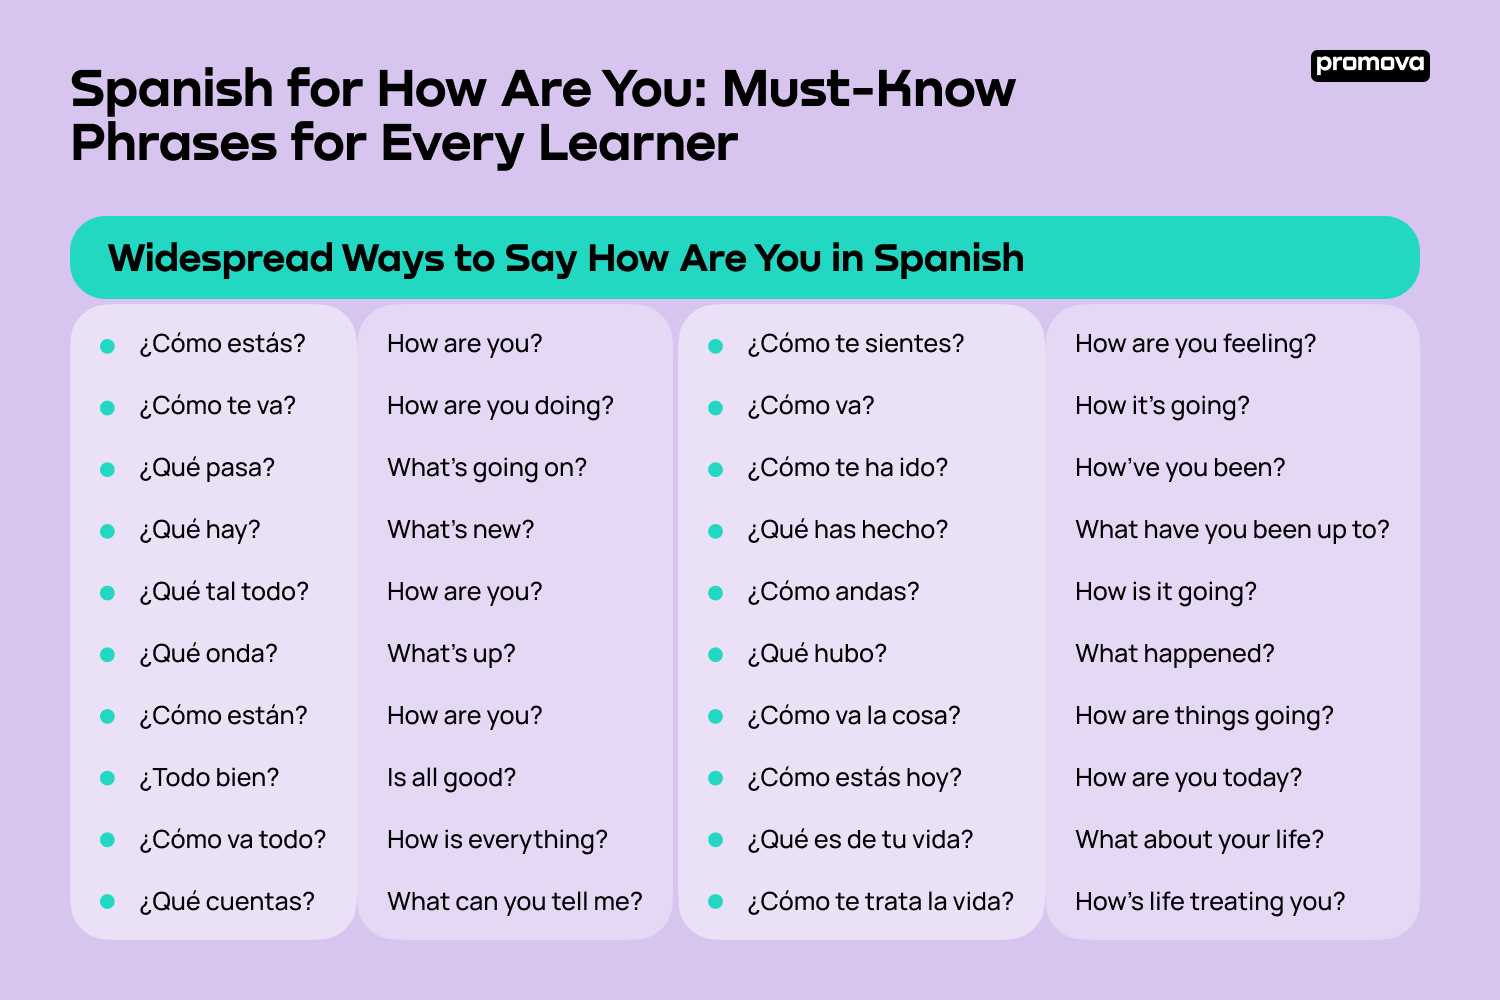 Widespread Ways to Say How Are You in Spanish